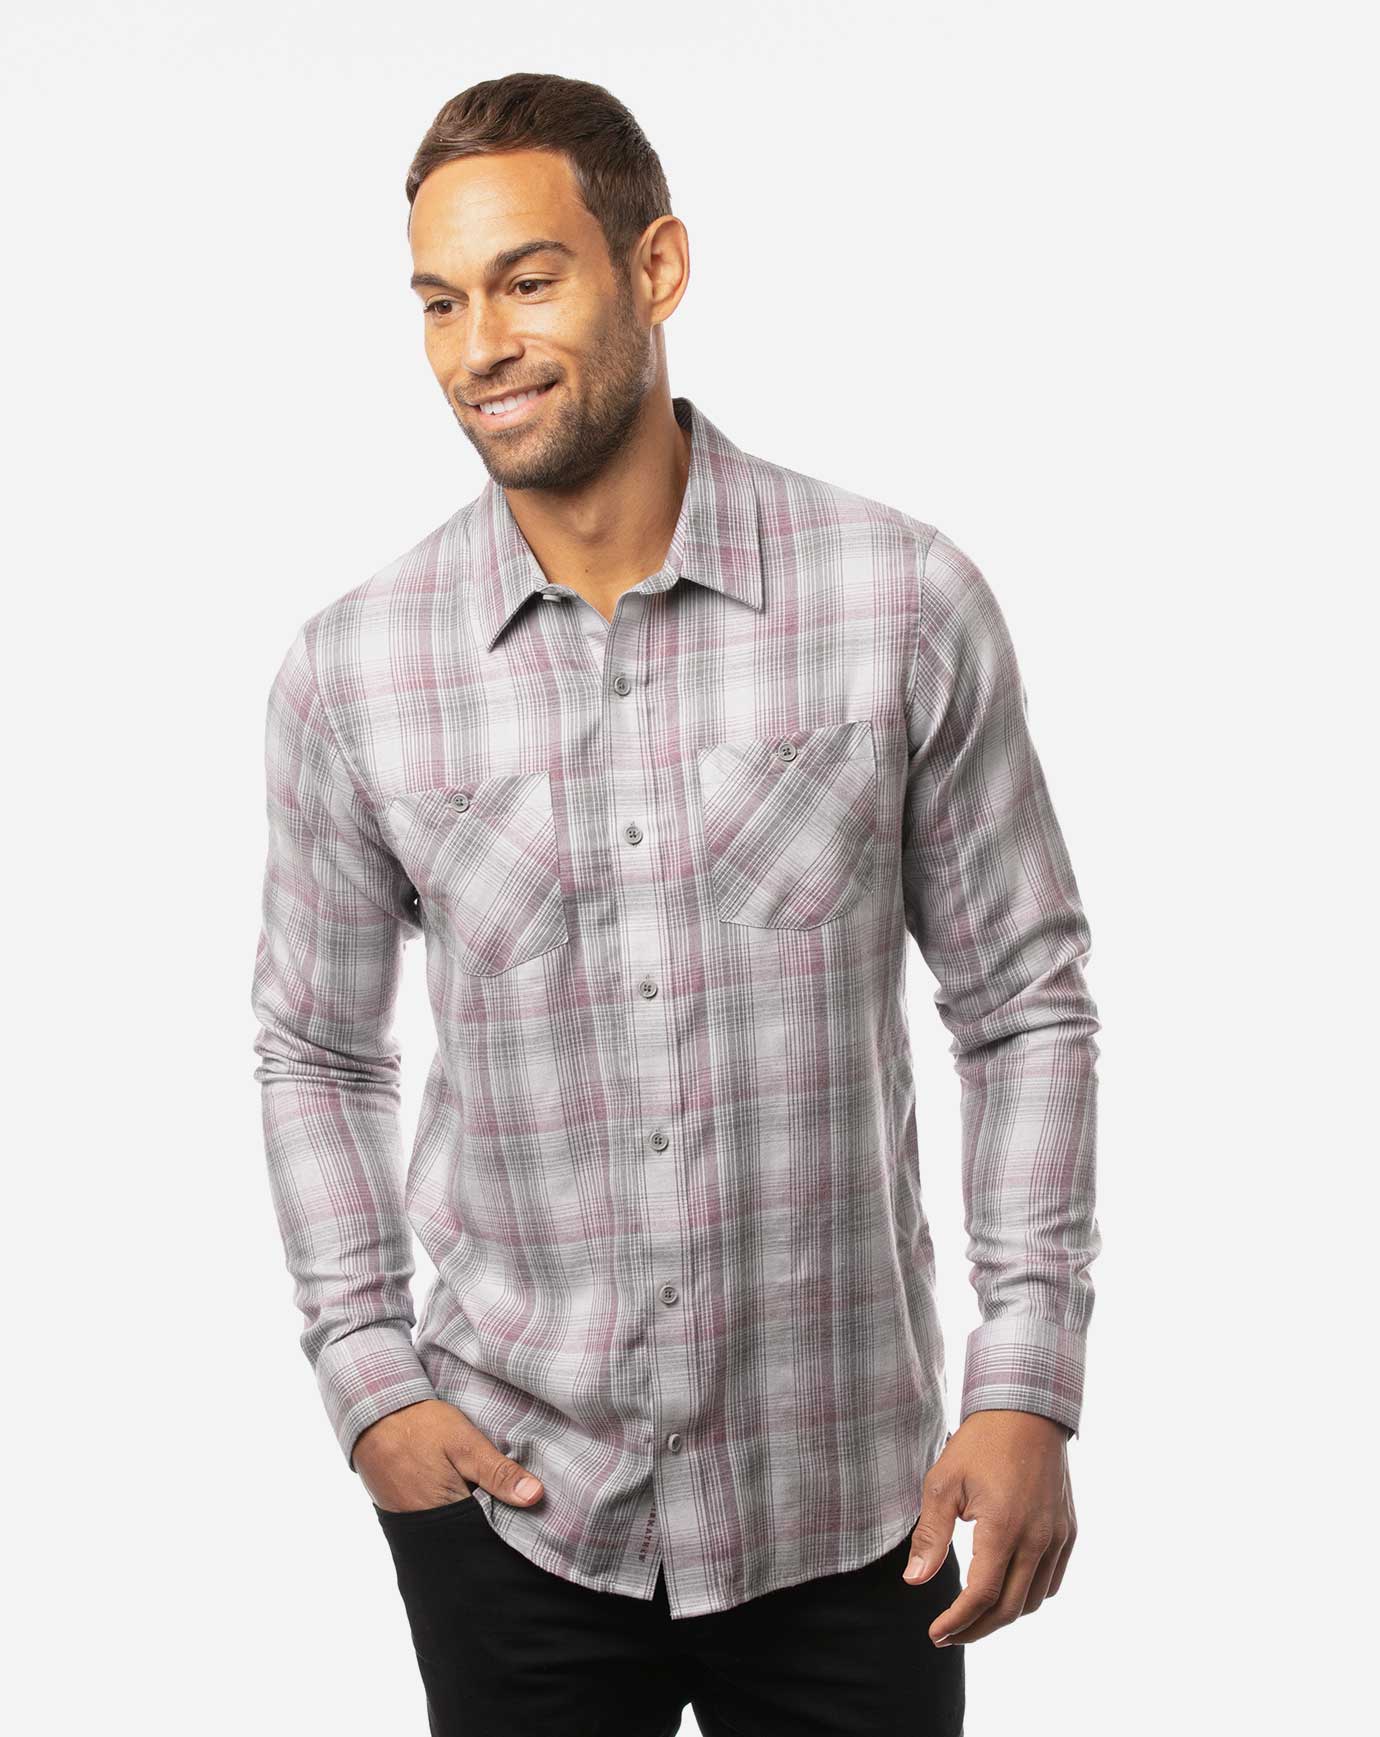 Related Product - CATCH MY DRIFT BUTTON-UP